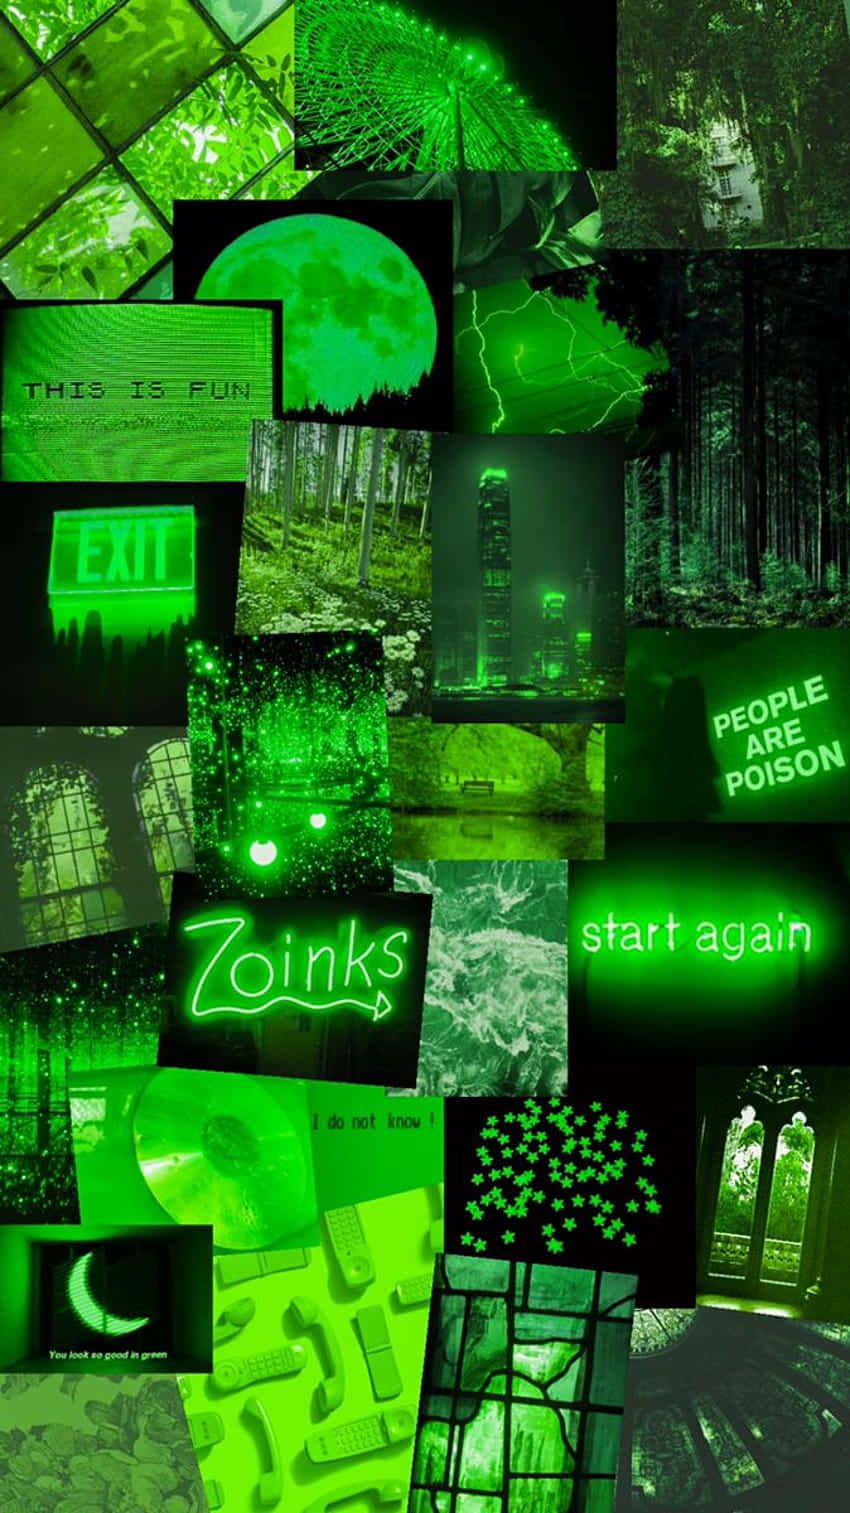 A collage of green images with text - Lime green, neon green